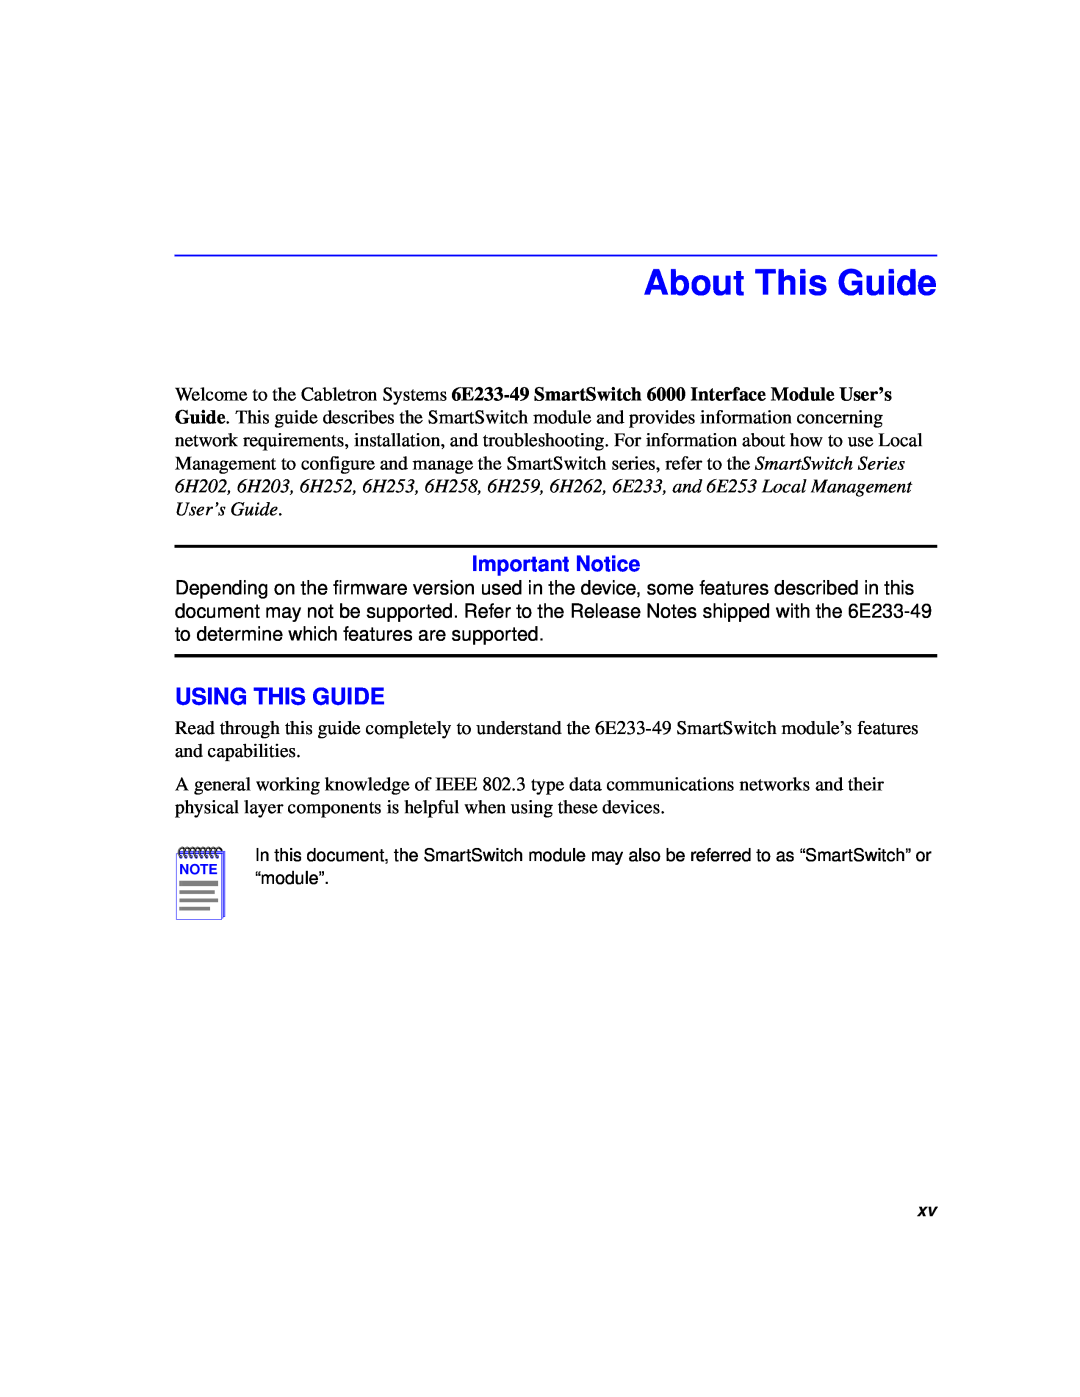 Cabletron Systems 6000 manual About This Guide, Using This Guide, Important Notice 